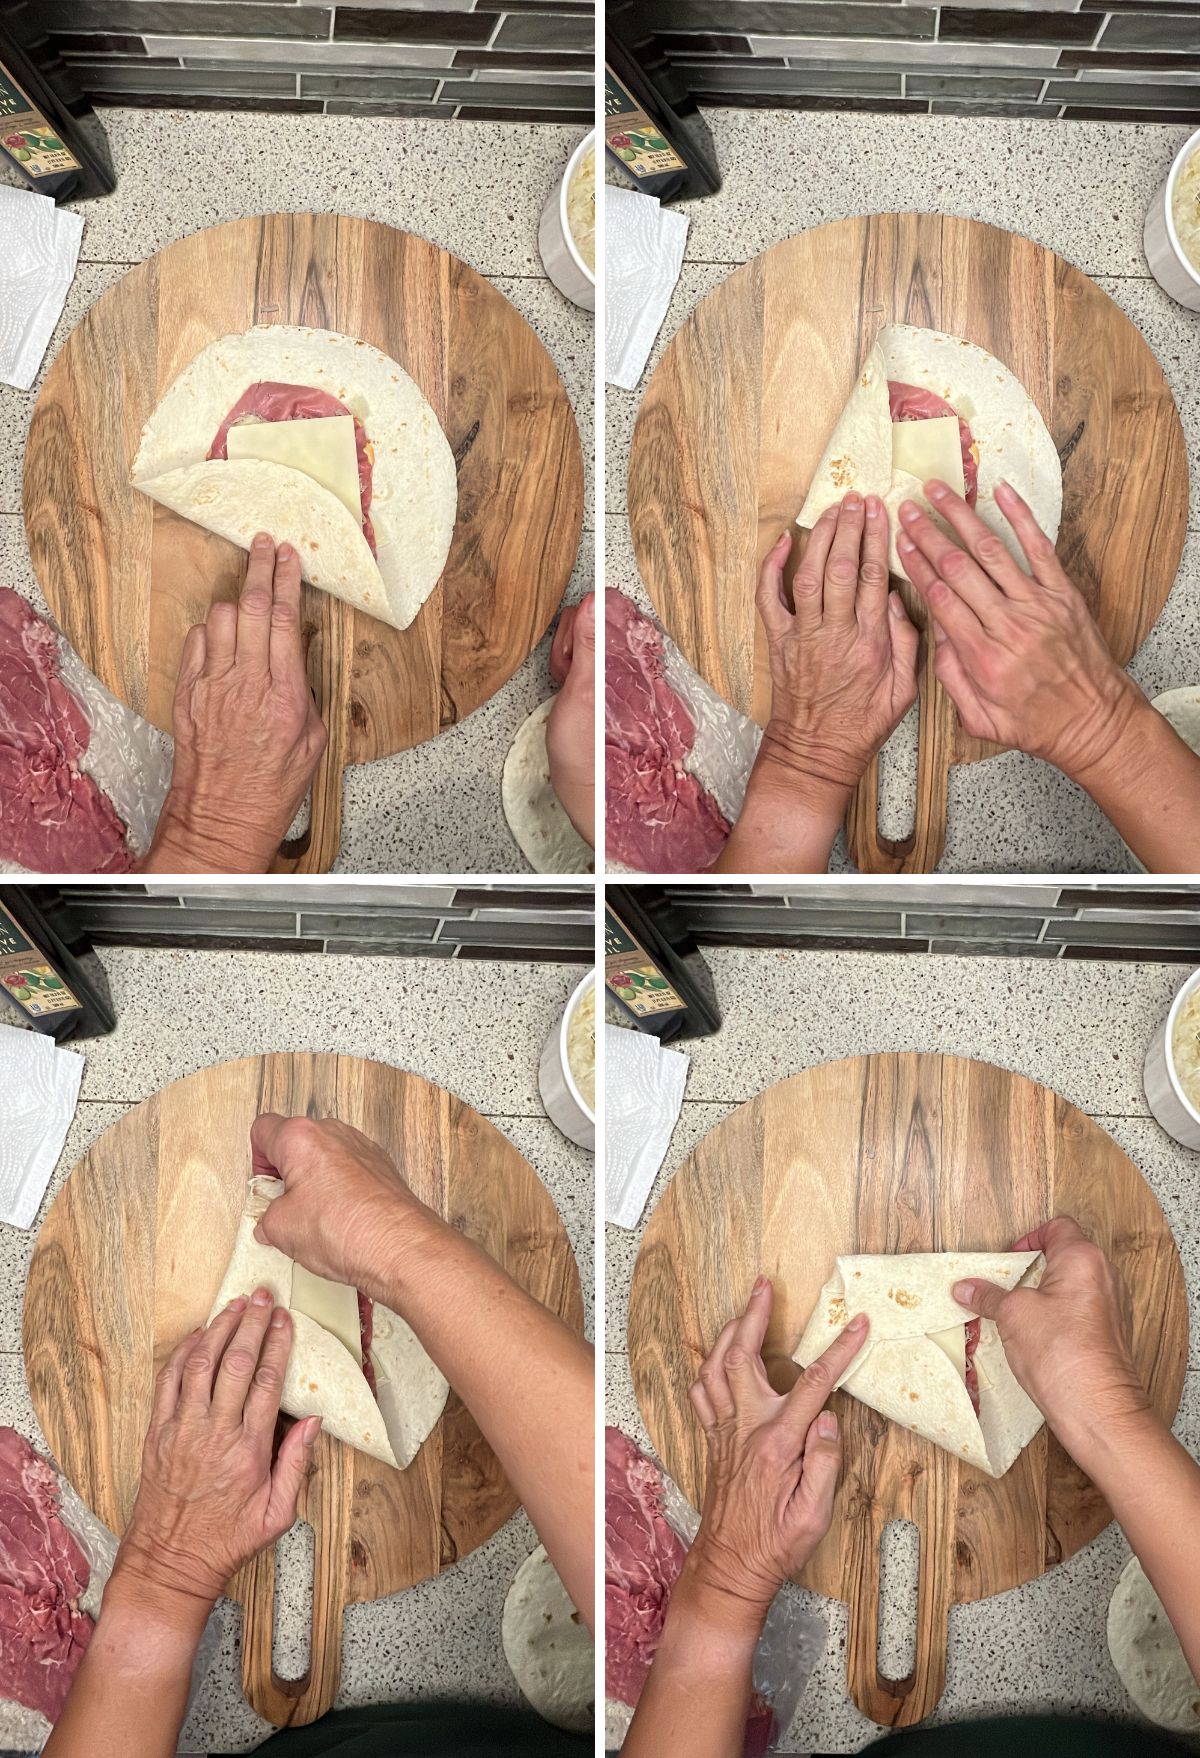 Step-by-step demonstration of folding a tortilla wrap with meat and cheese filling.